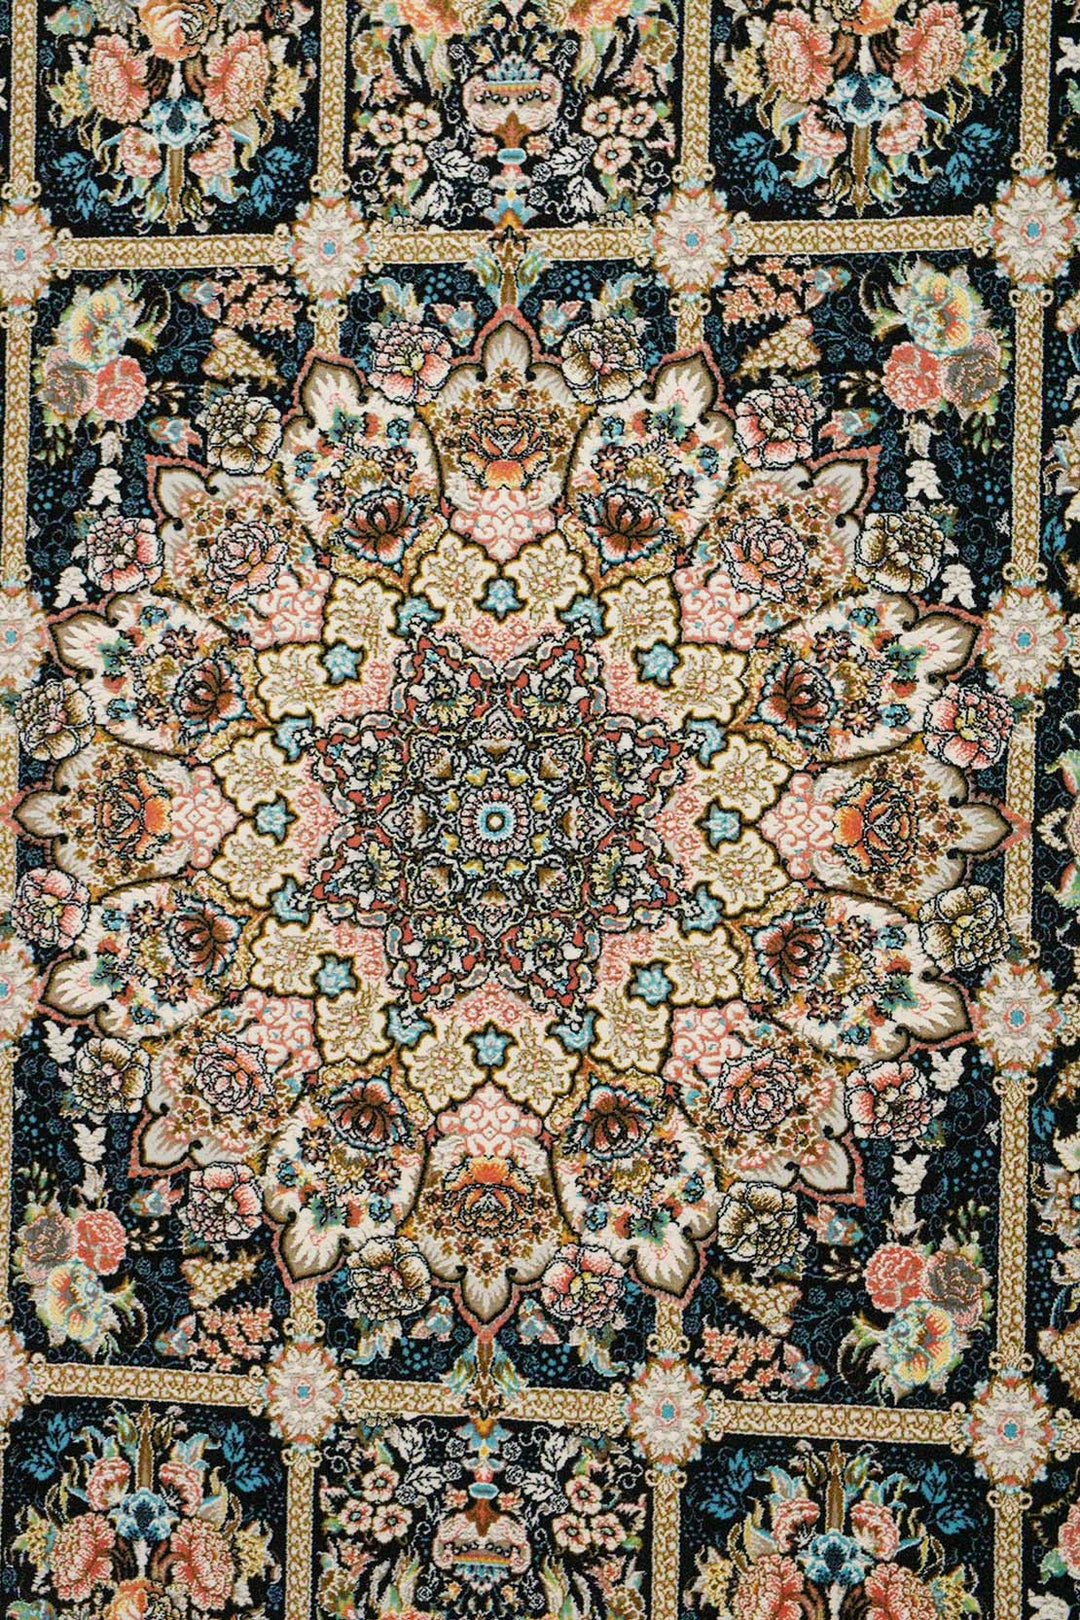 Iranian Premium Quality Oriental Collection Rug - 6.5 x 9.8 FT - Blue - Resilient Construction for Long-Lasting Use - V Surfaces